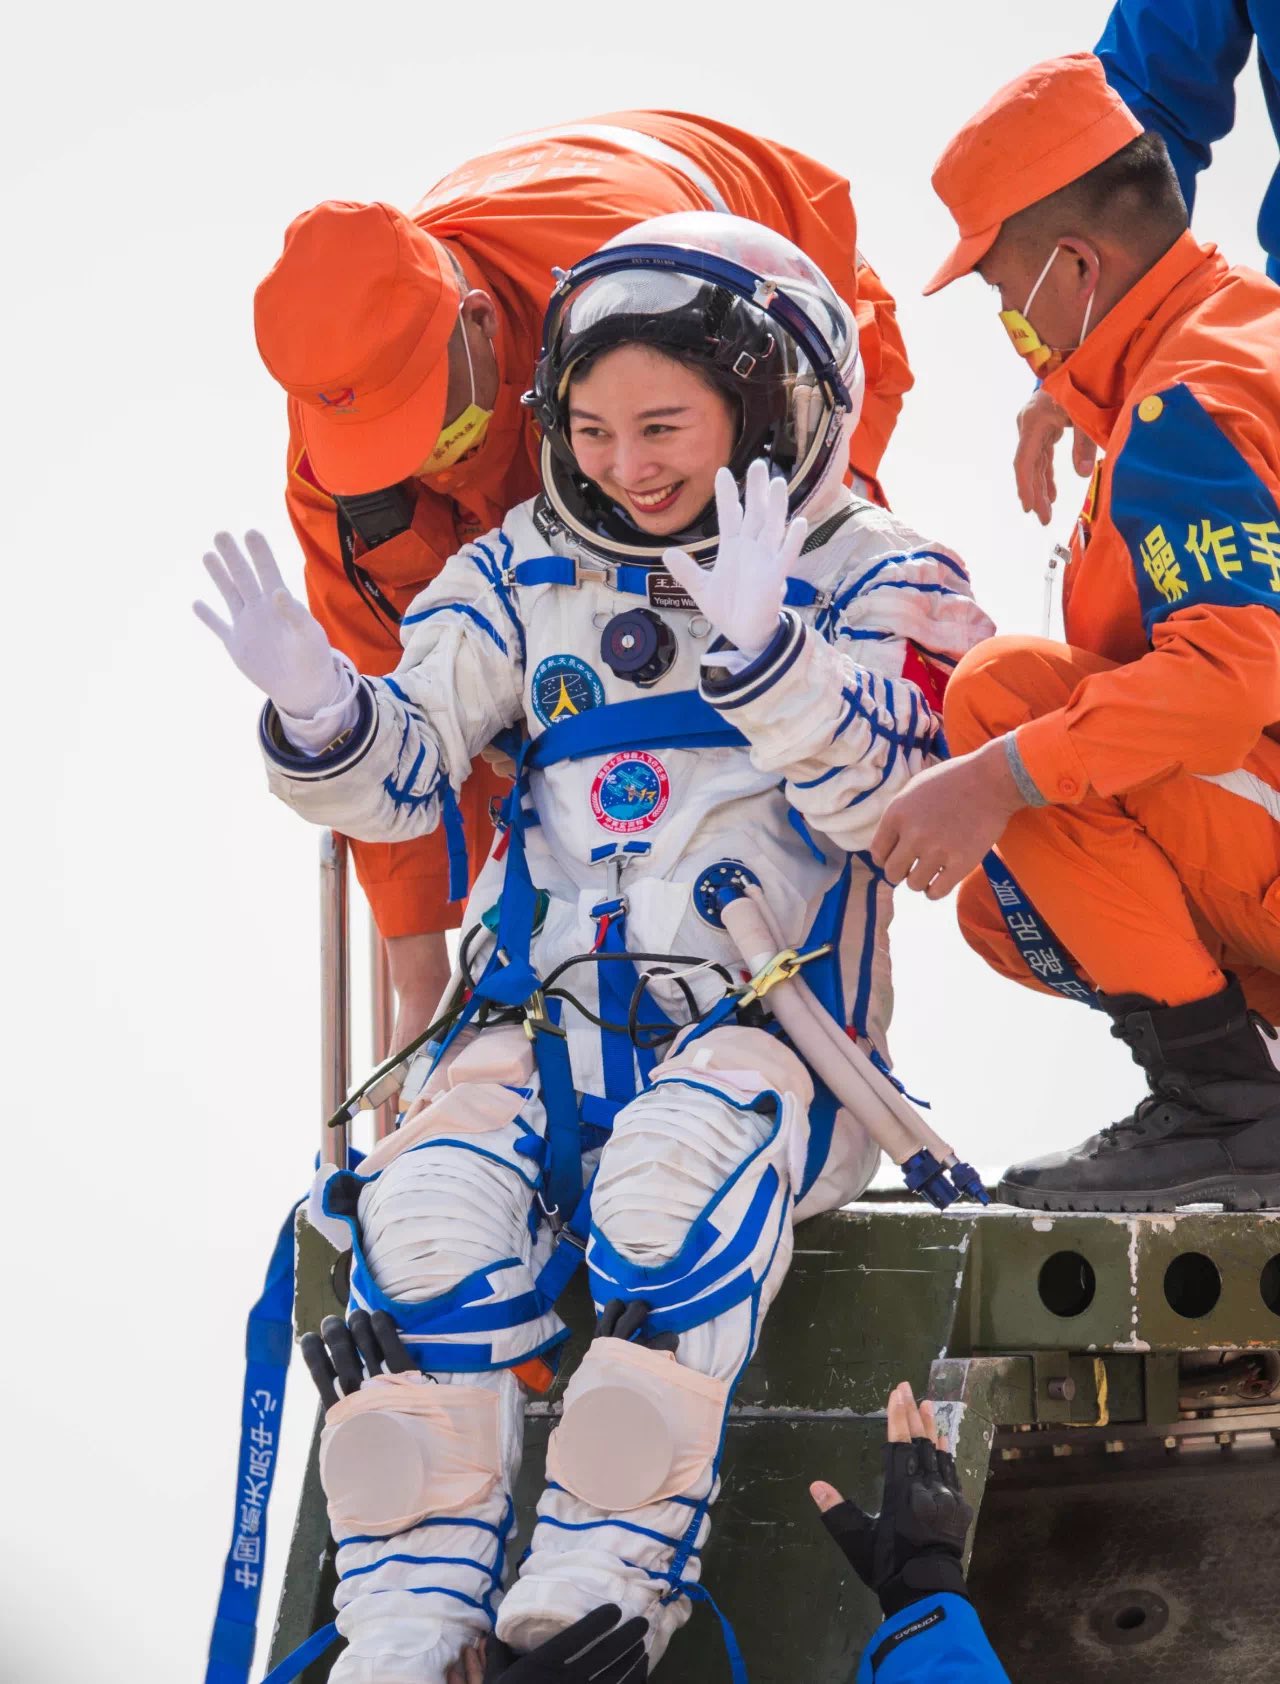 China's next manned space mission will take place this year and will again consist of six people